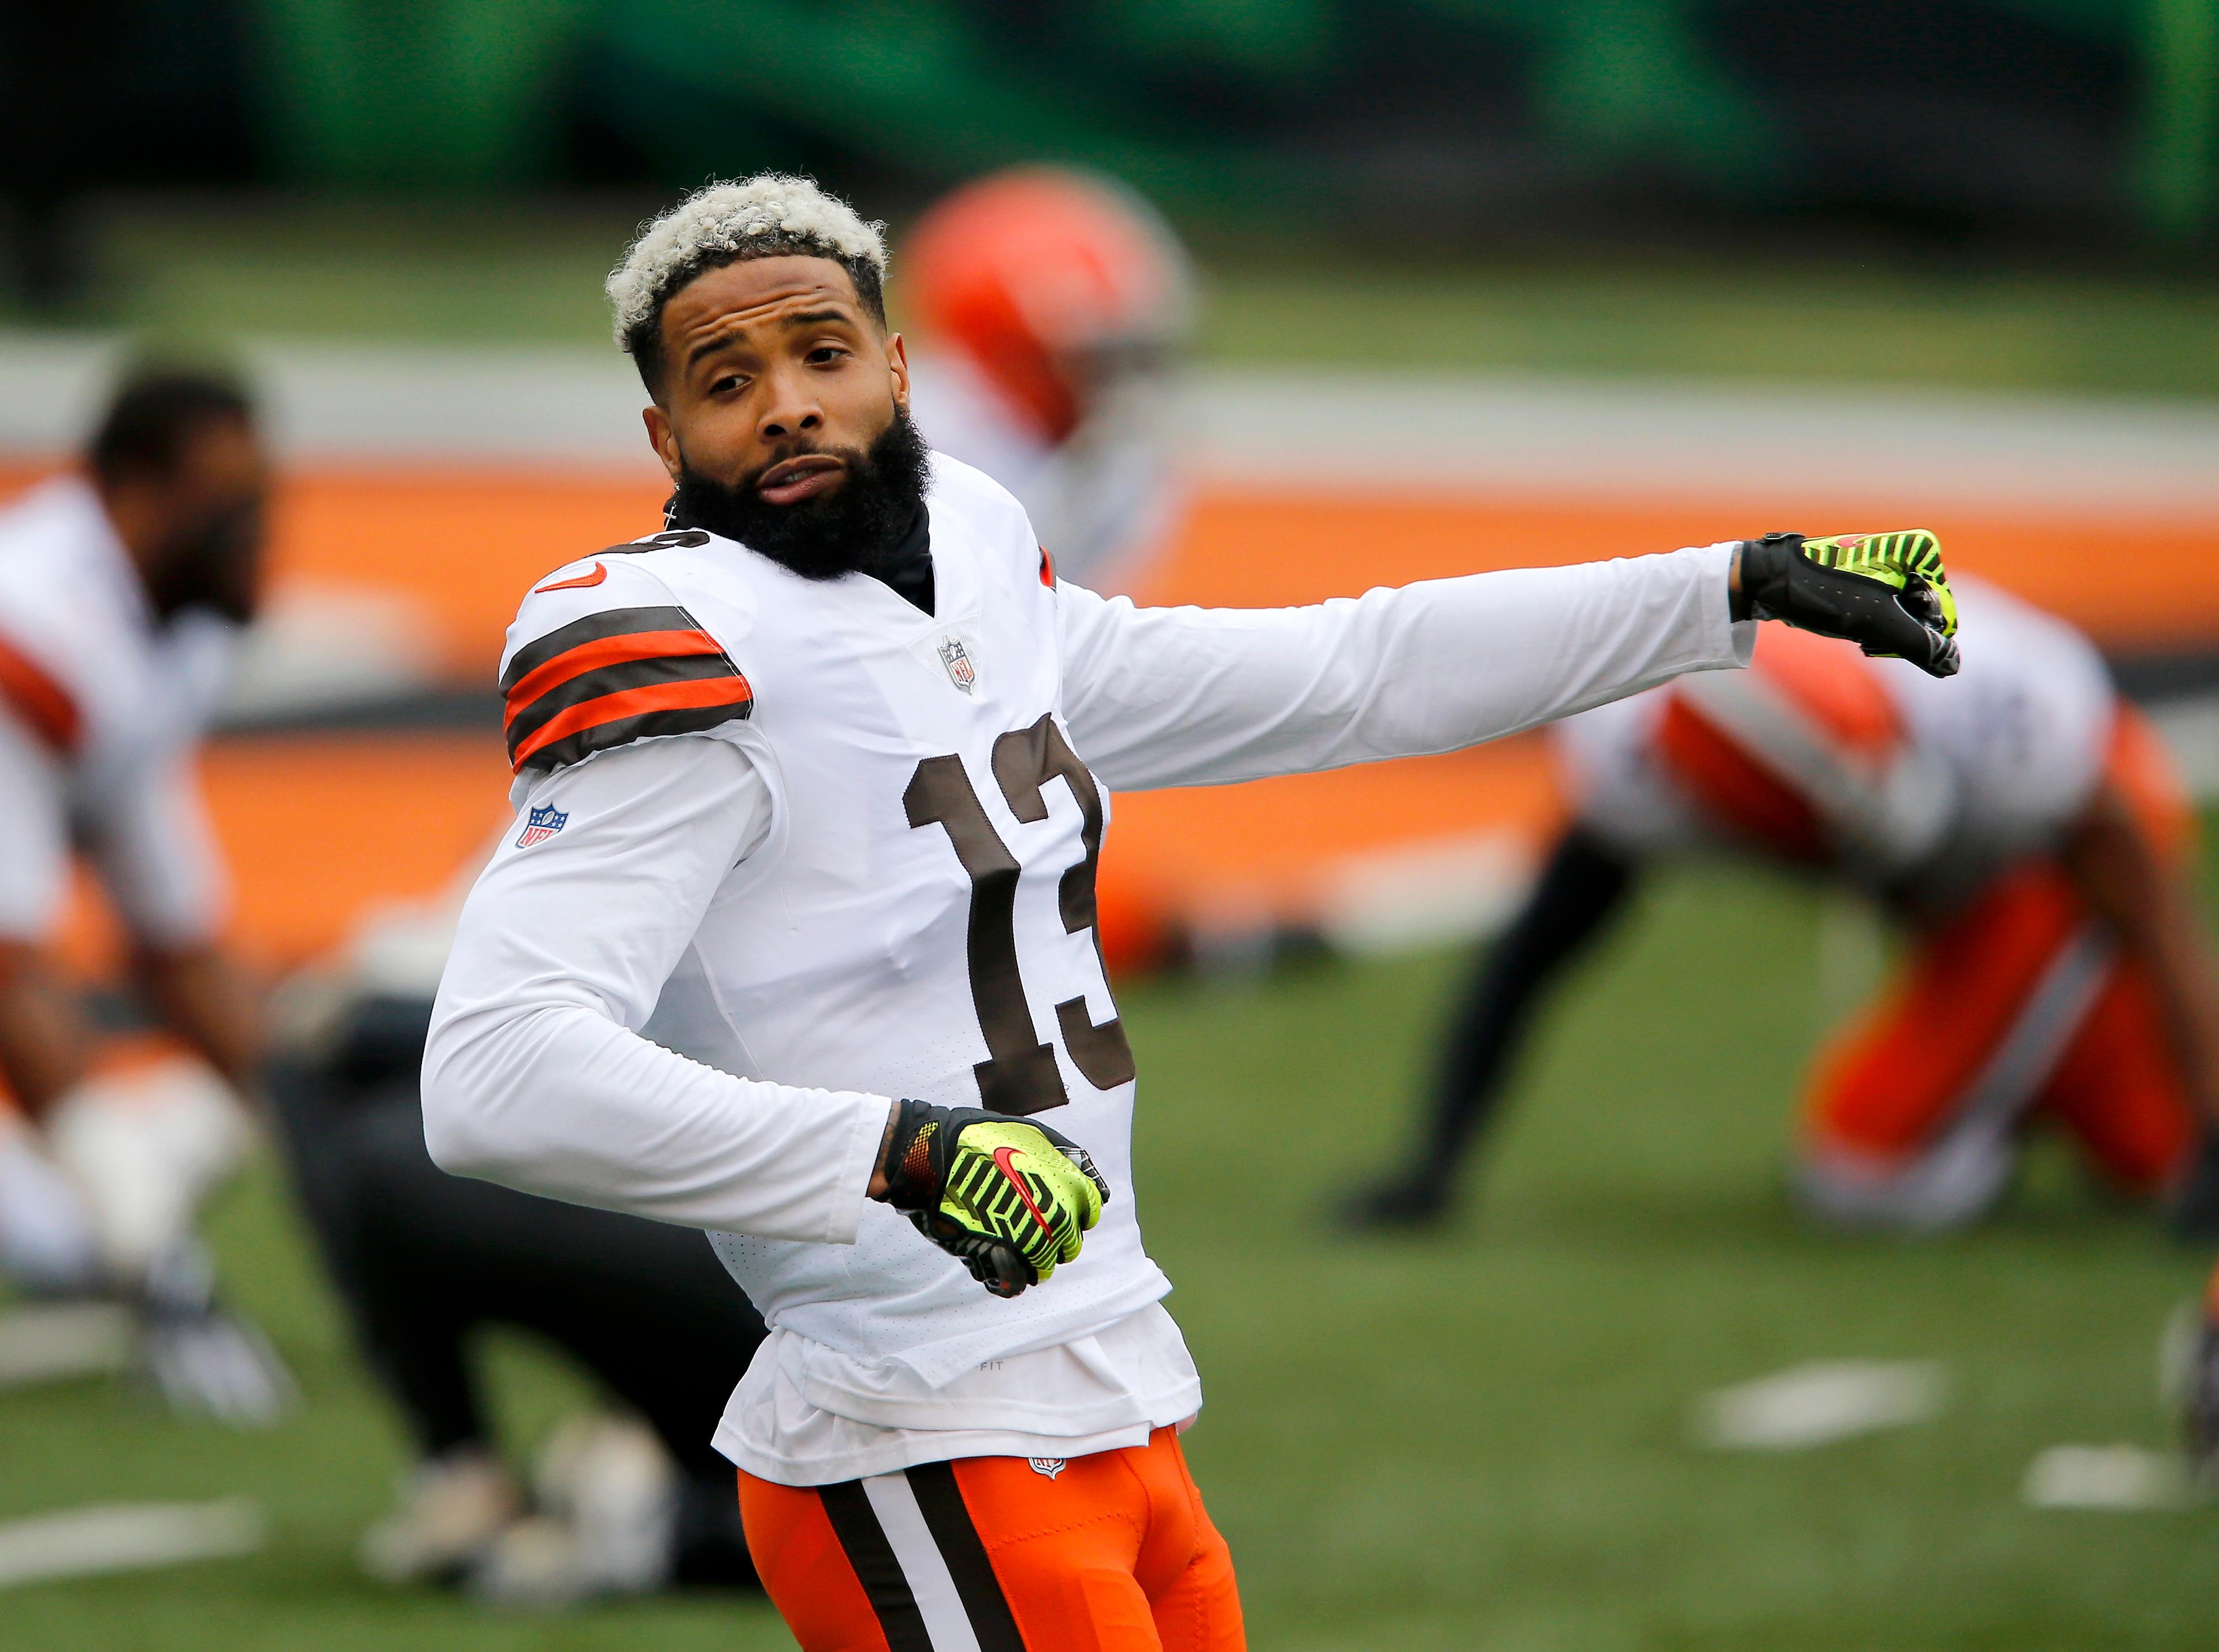 Oct 25, 2020; Cincinnati, Ohio, USA; Cleveland Browns wide receiver Odell Beckham Jr. (13) warms up before the game between the Cincinnati Bengals and the Cleveland Browns at Paul Brown Stadium. / © Joseph Maiorana-USA TODAY Sports